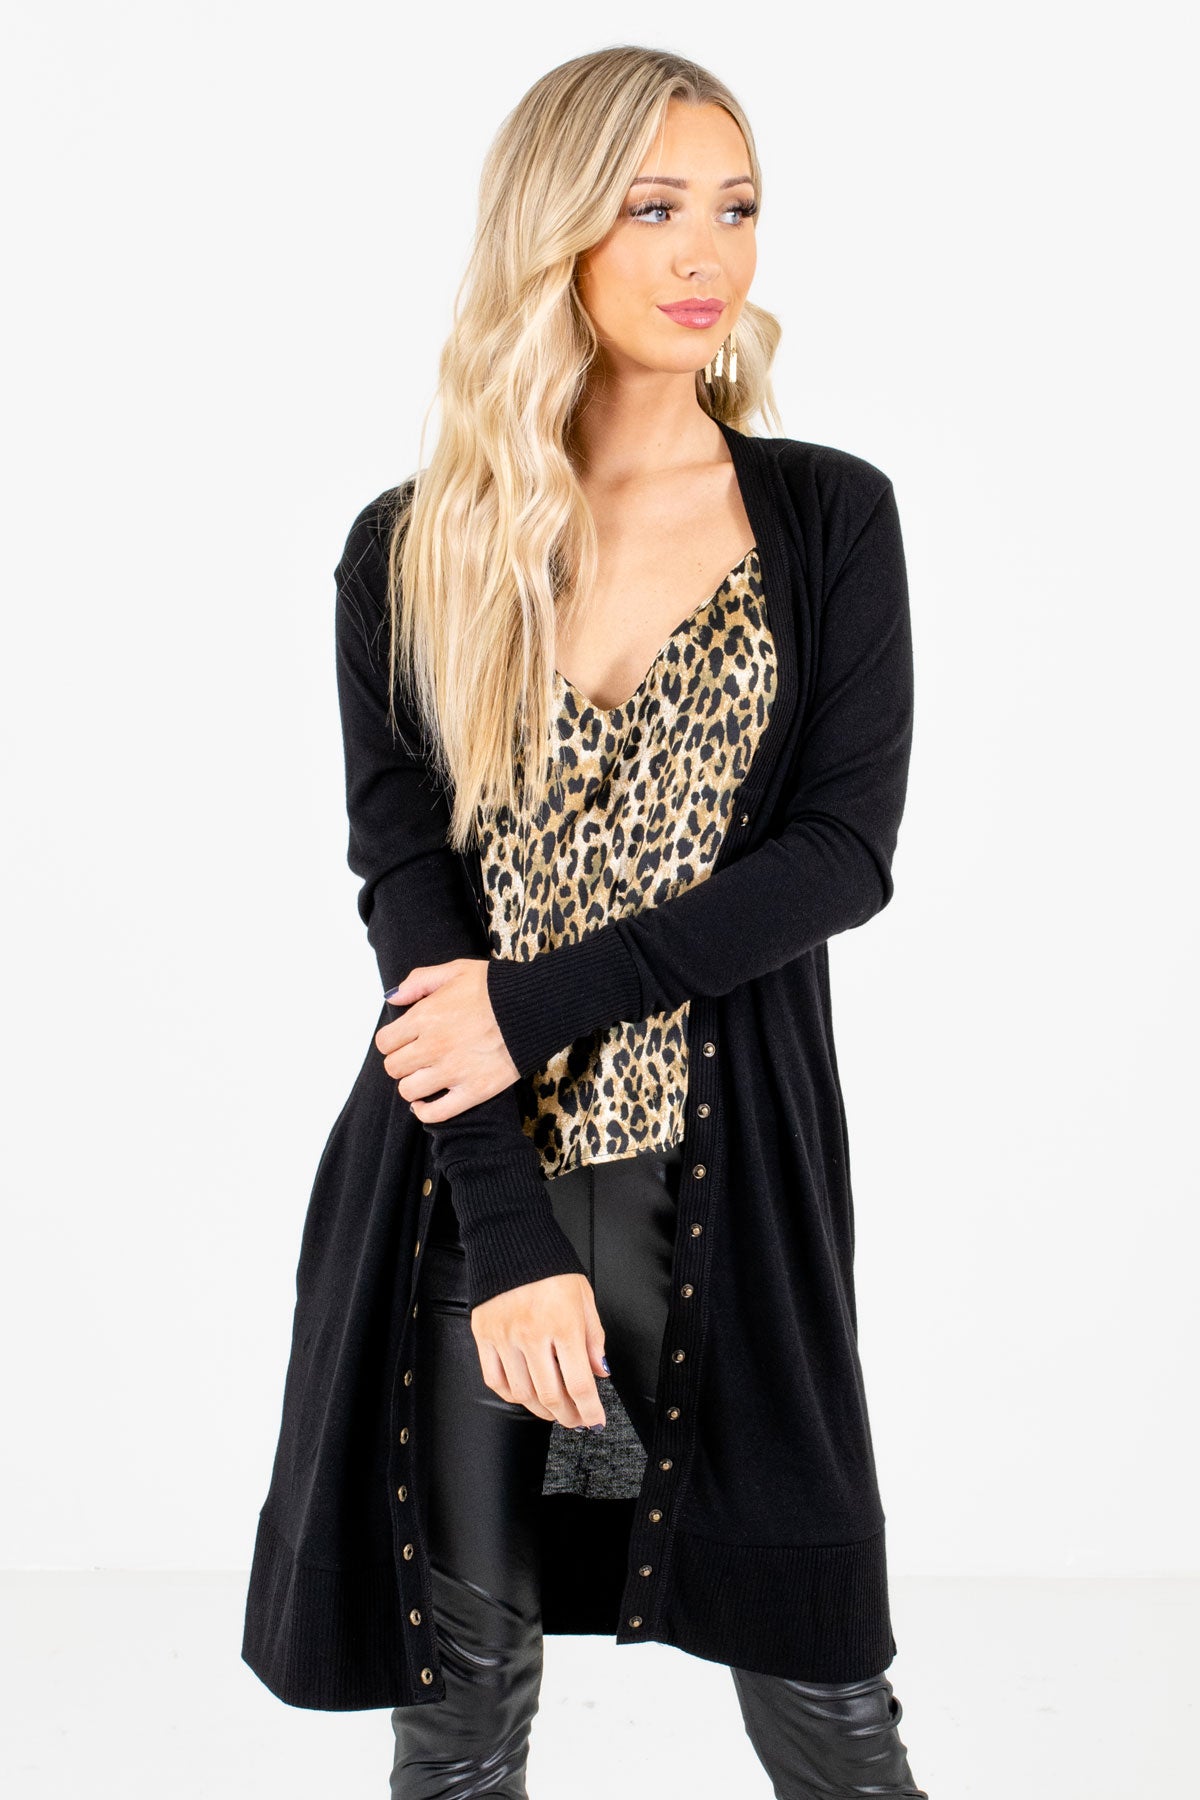 Black Boutique Cardigans with Pockets for Women